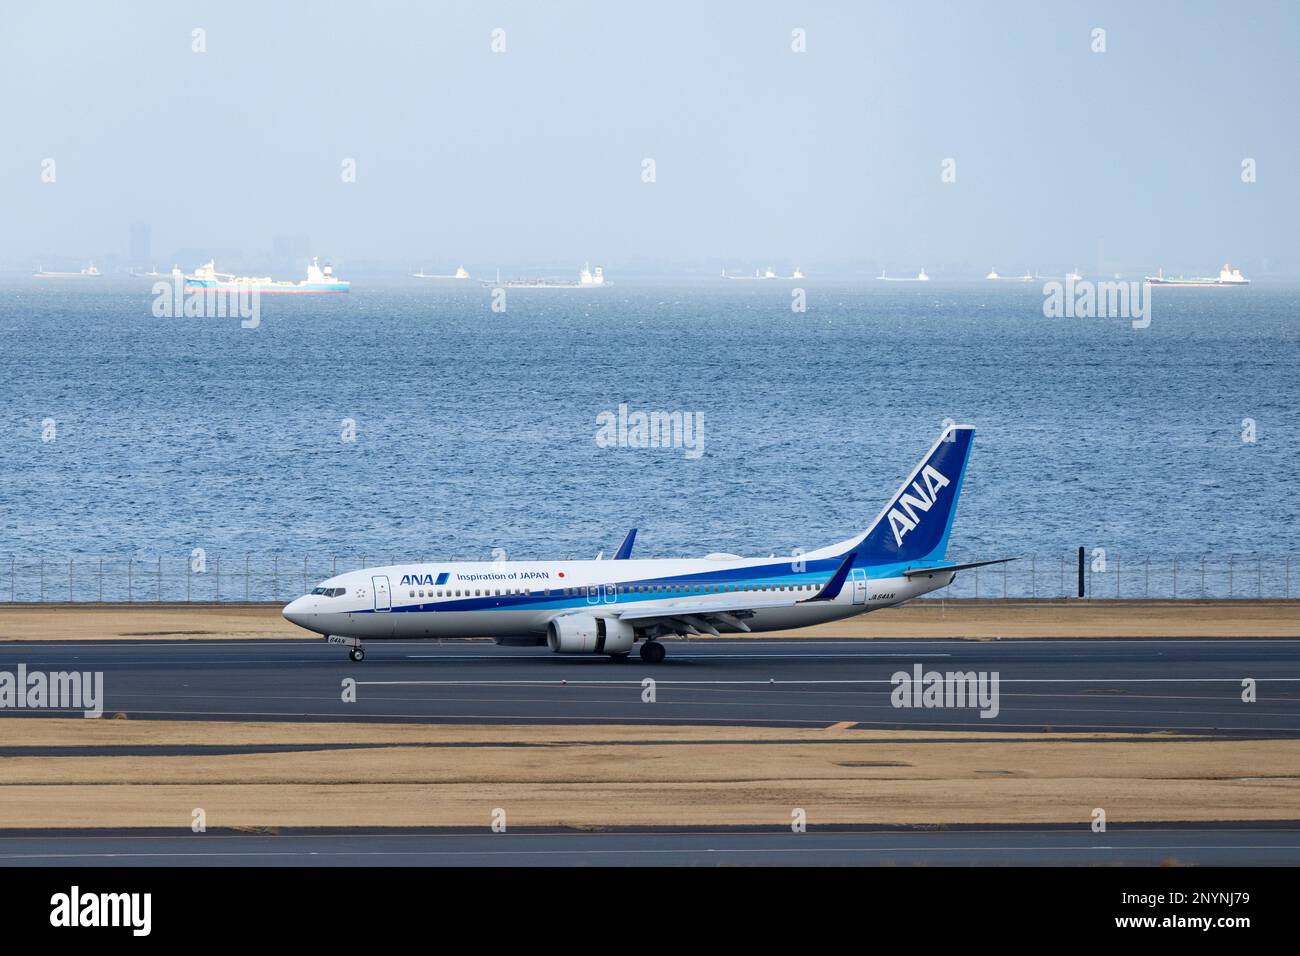 March 2, 2023, Tokyo, Japan: An ANA Boeing 737-800 NG (JA64AN) at Tokyo Haneda International Airport. (HND) The airline industry faces a severe staffing and pilot shortage as international travel rebounds after the COVID-19 pandemic.ANA (All Nippon Airways å…¨æ-¥æœ¬ç © ºè¼¸æ ªå¼ä¼šç¤¾) is one of the leading airlines in the Asia-Pacific region. Founded in 1952, it has grown to become the largest airline in Japan, operating both domestic and international flights. ANA has a fleet of over 250 aircraft, including Boeing 787 Dreamliners and Airbus A380s, and serves more than 100 destinations in As Stock Photo